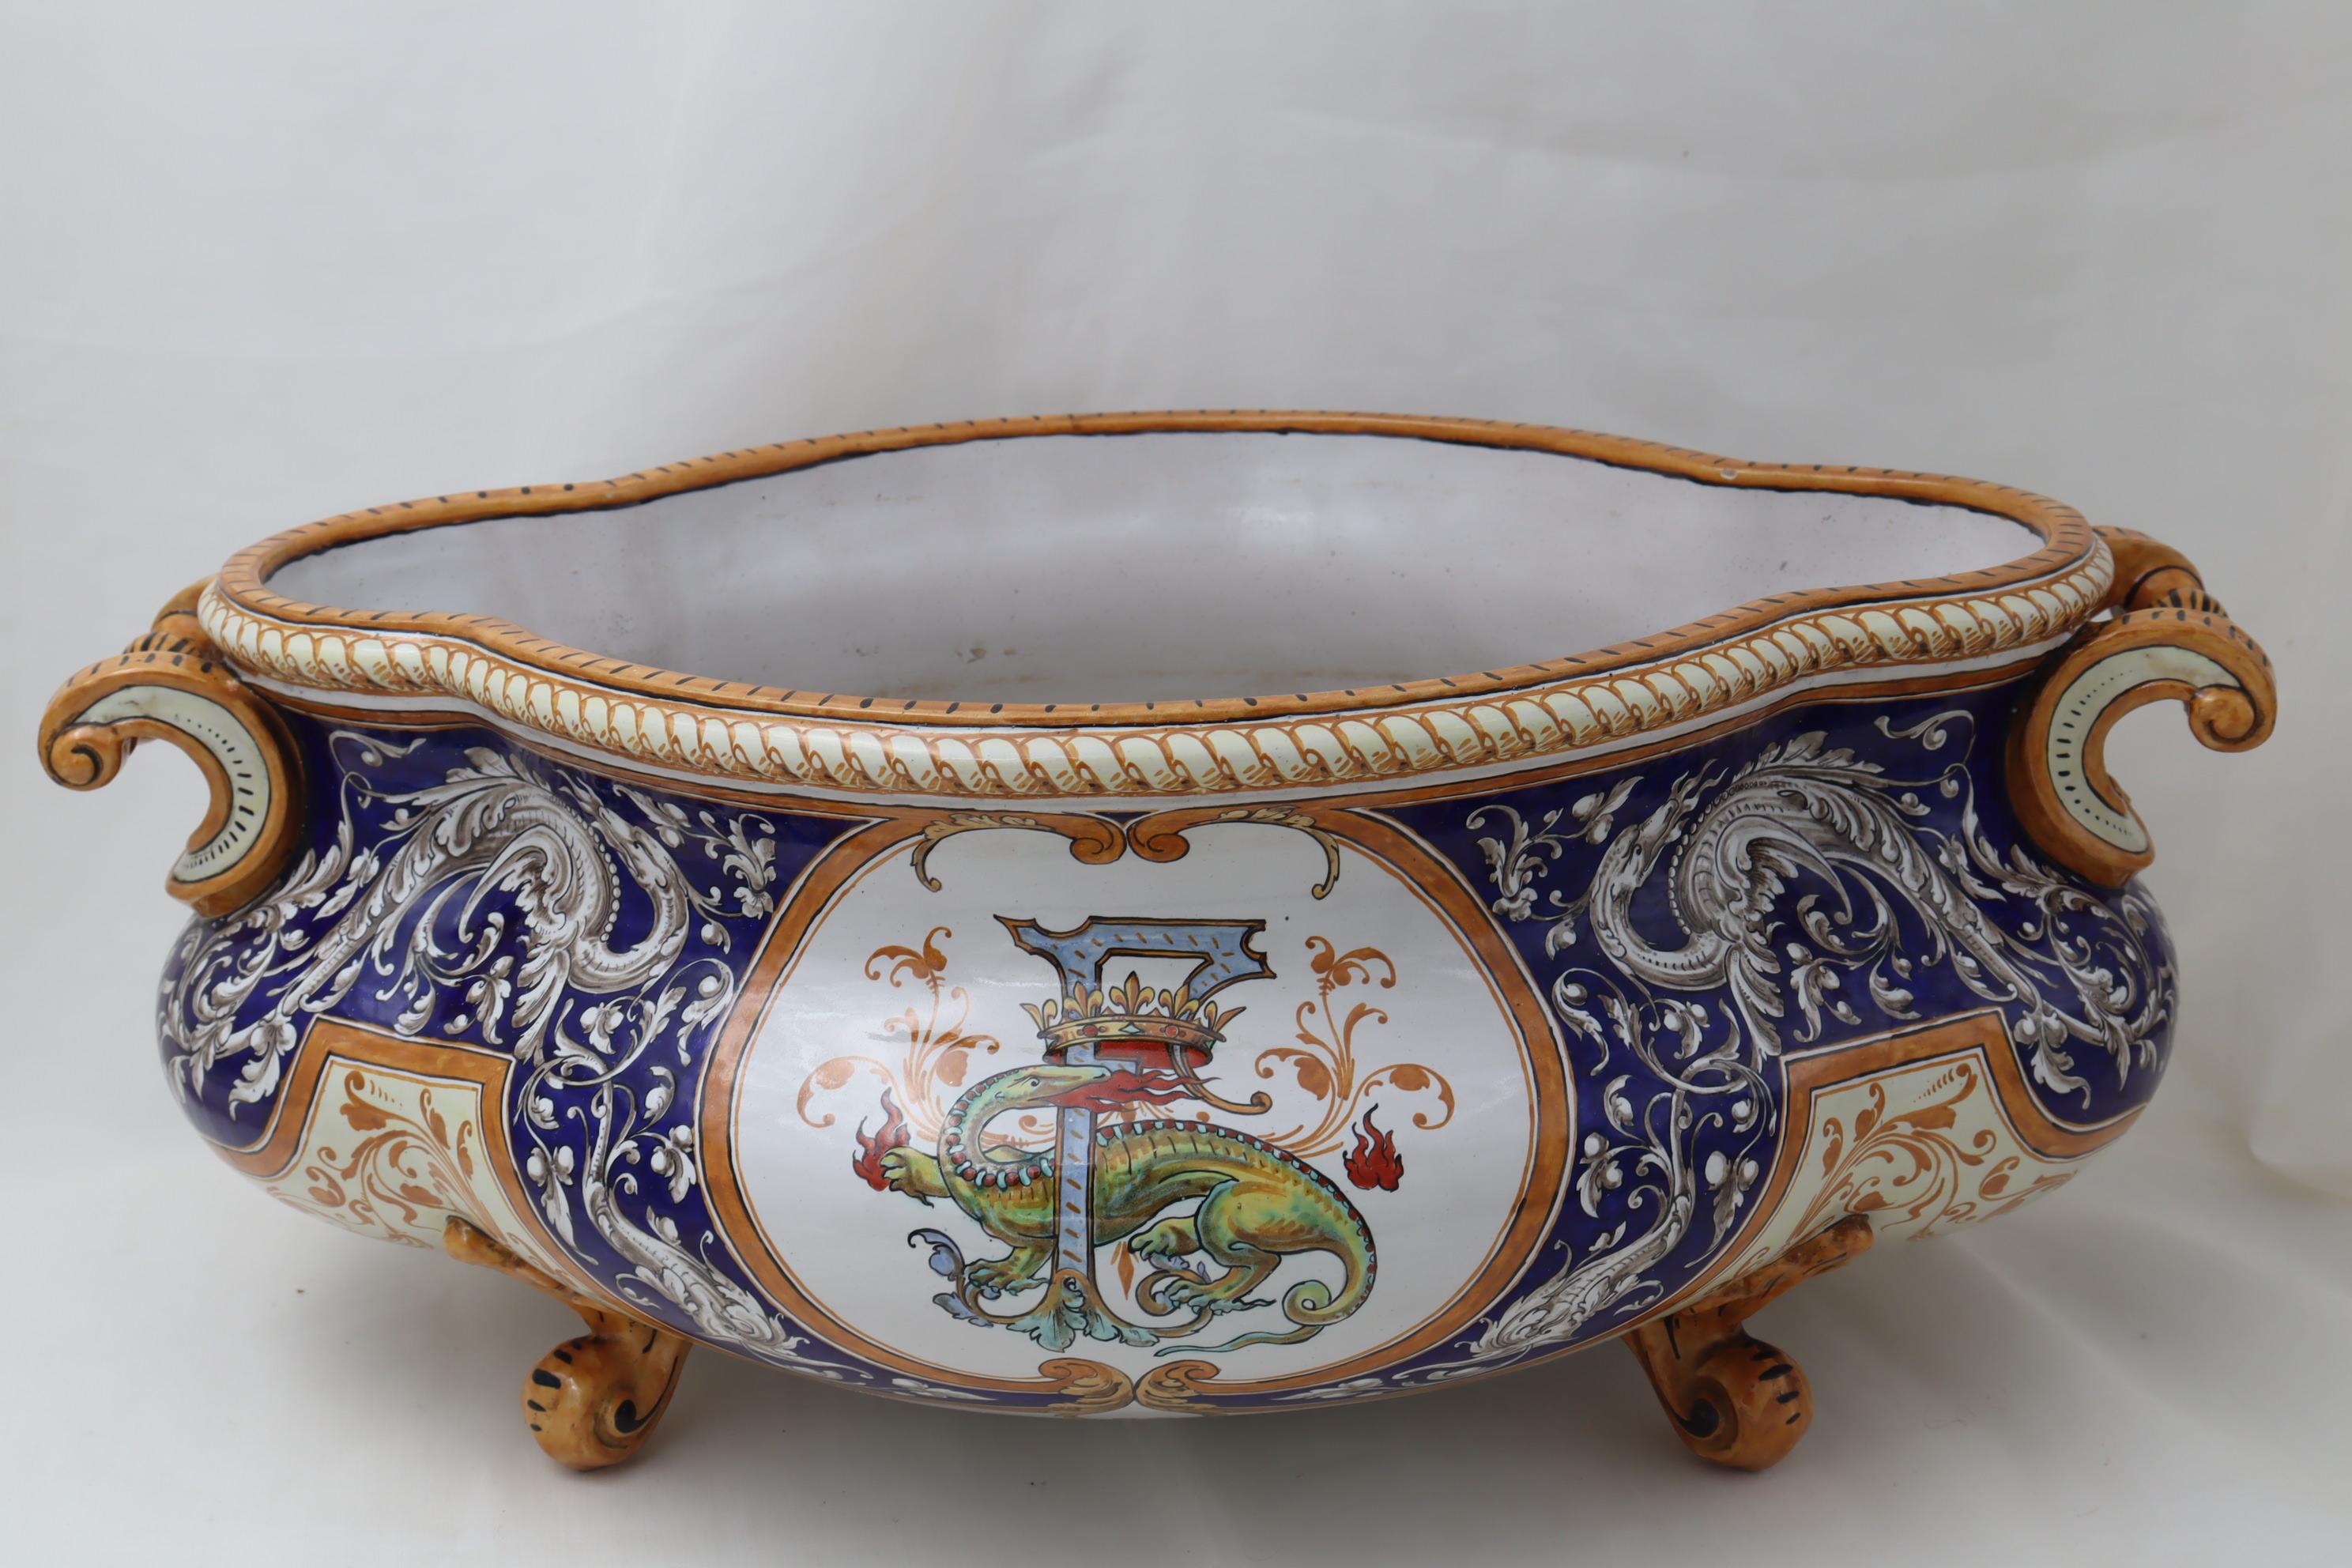 This very large bombe shaped two handled faience jardiniere is by Ulysse Besnard of Blois, France, and rests on four feet. The hand painted decoration includes swirling arabesques and dragons, and on each side in a central cartouche is a hand